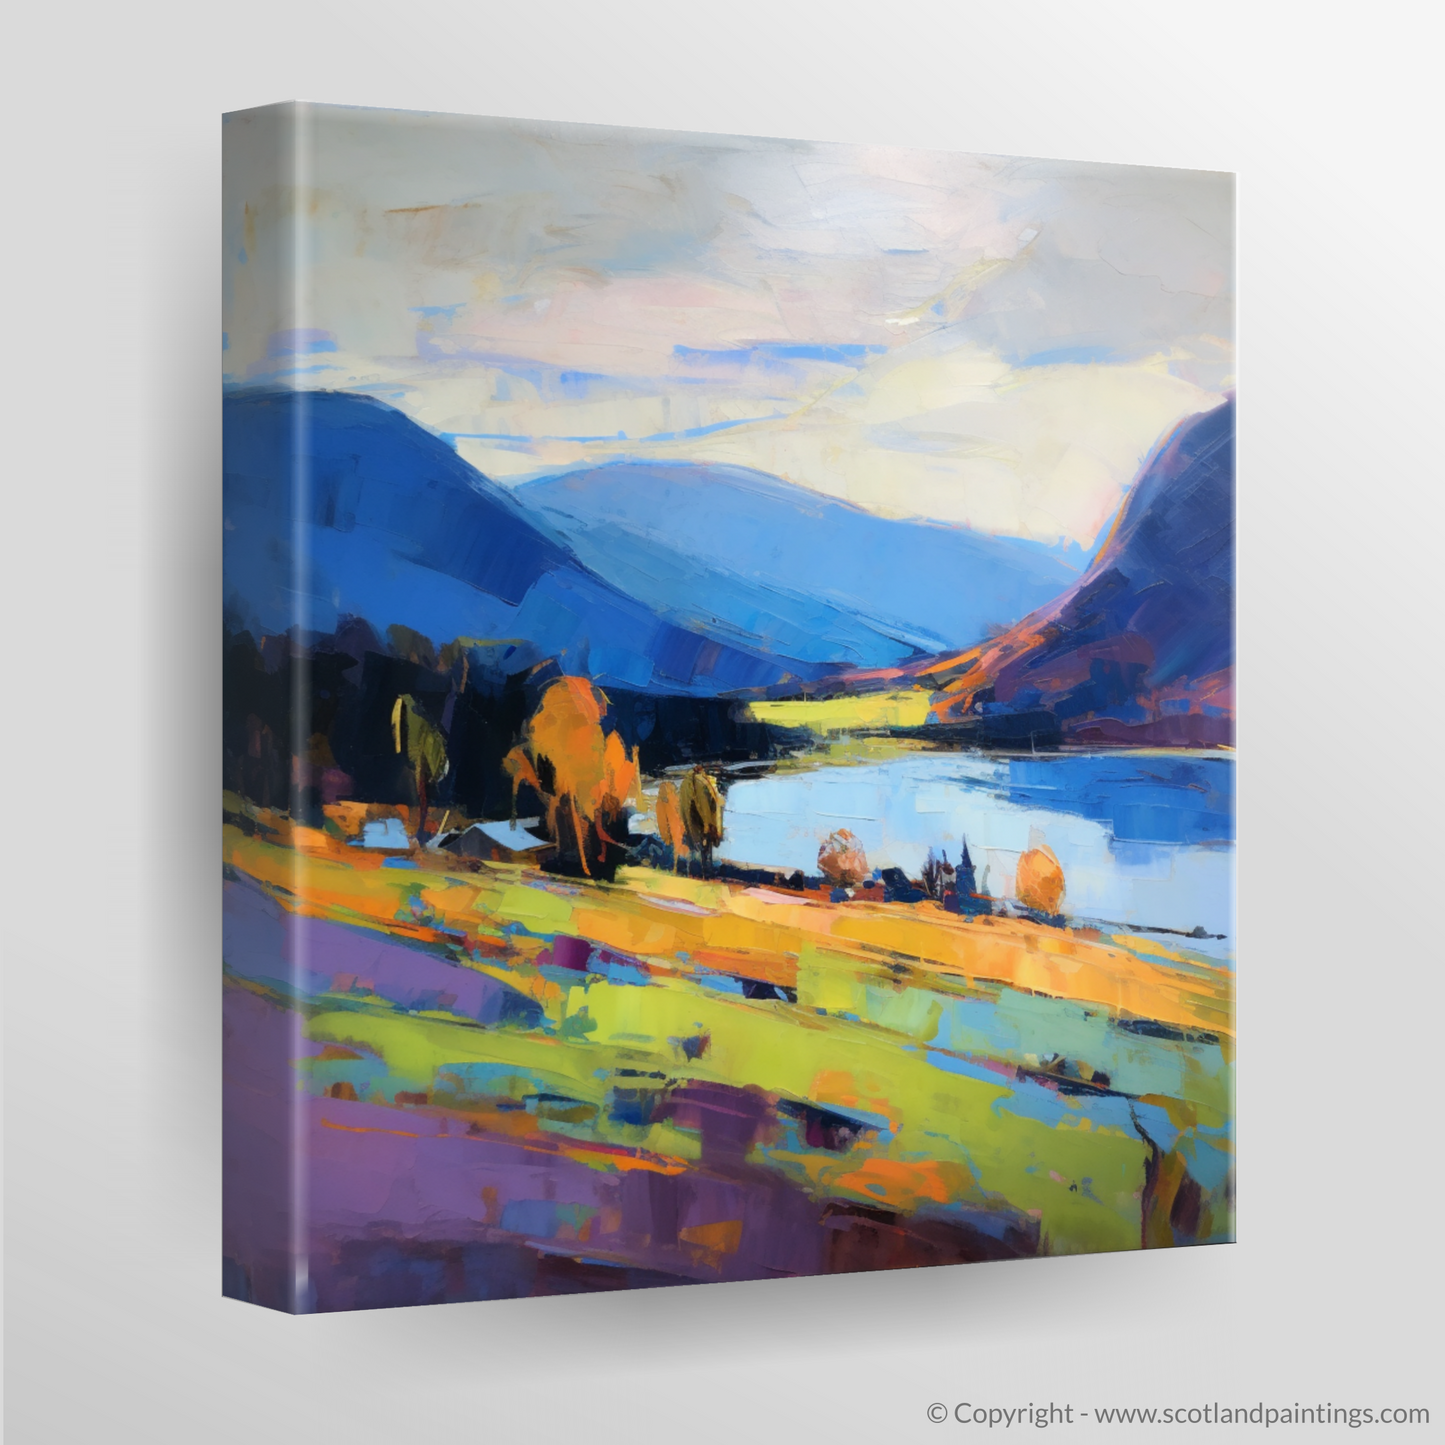 Highland Embrace: An Expressionist Ode to Loch Earn